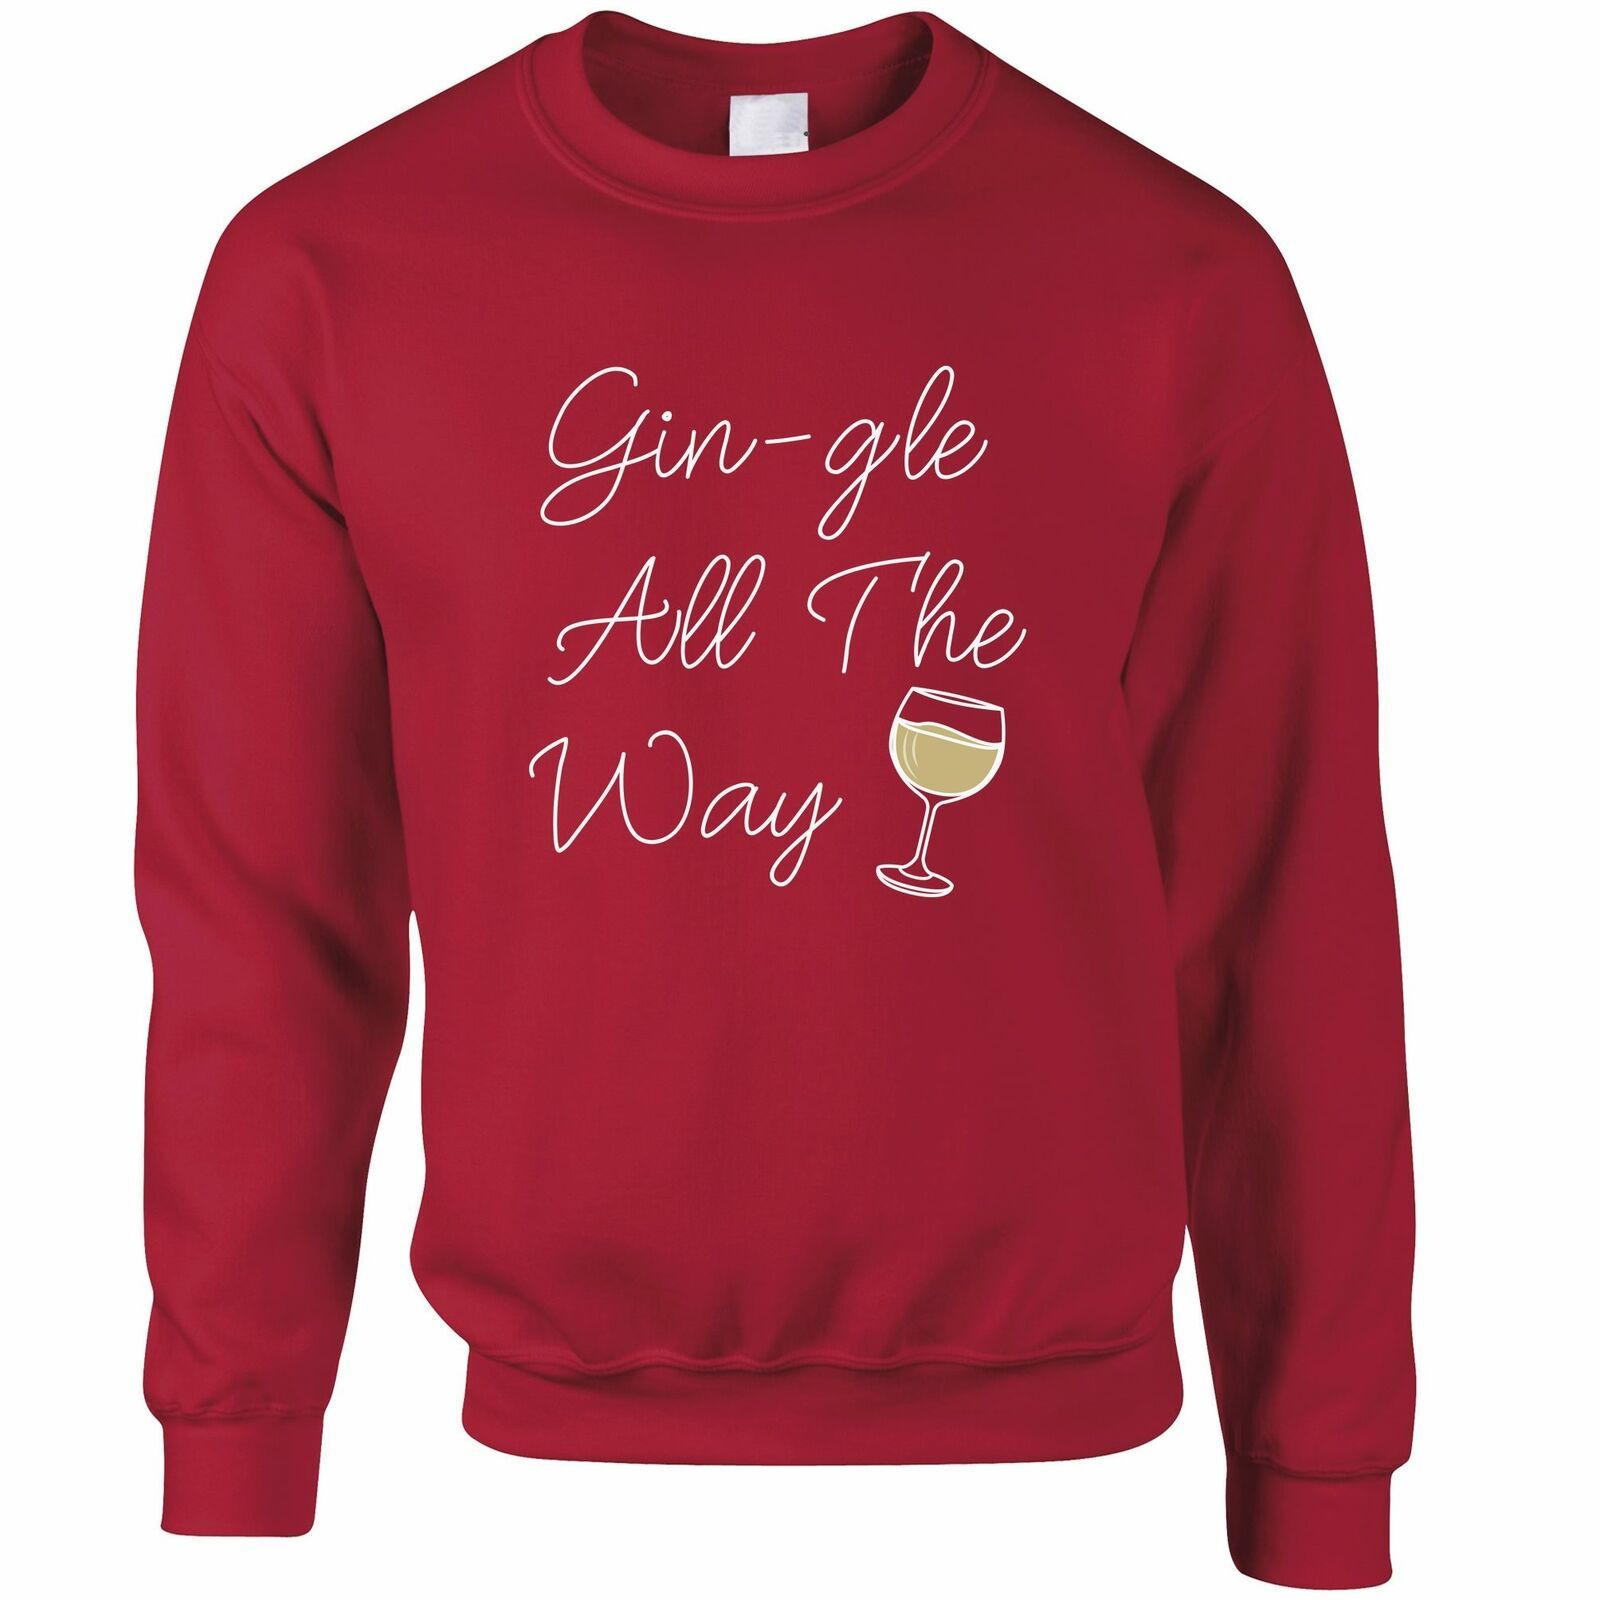 Gin-gle All The Way Wine Party Christmas Sweatshirt Style: Sweatshirt, Color: Red